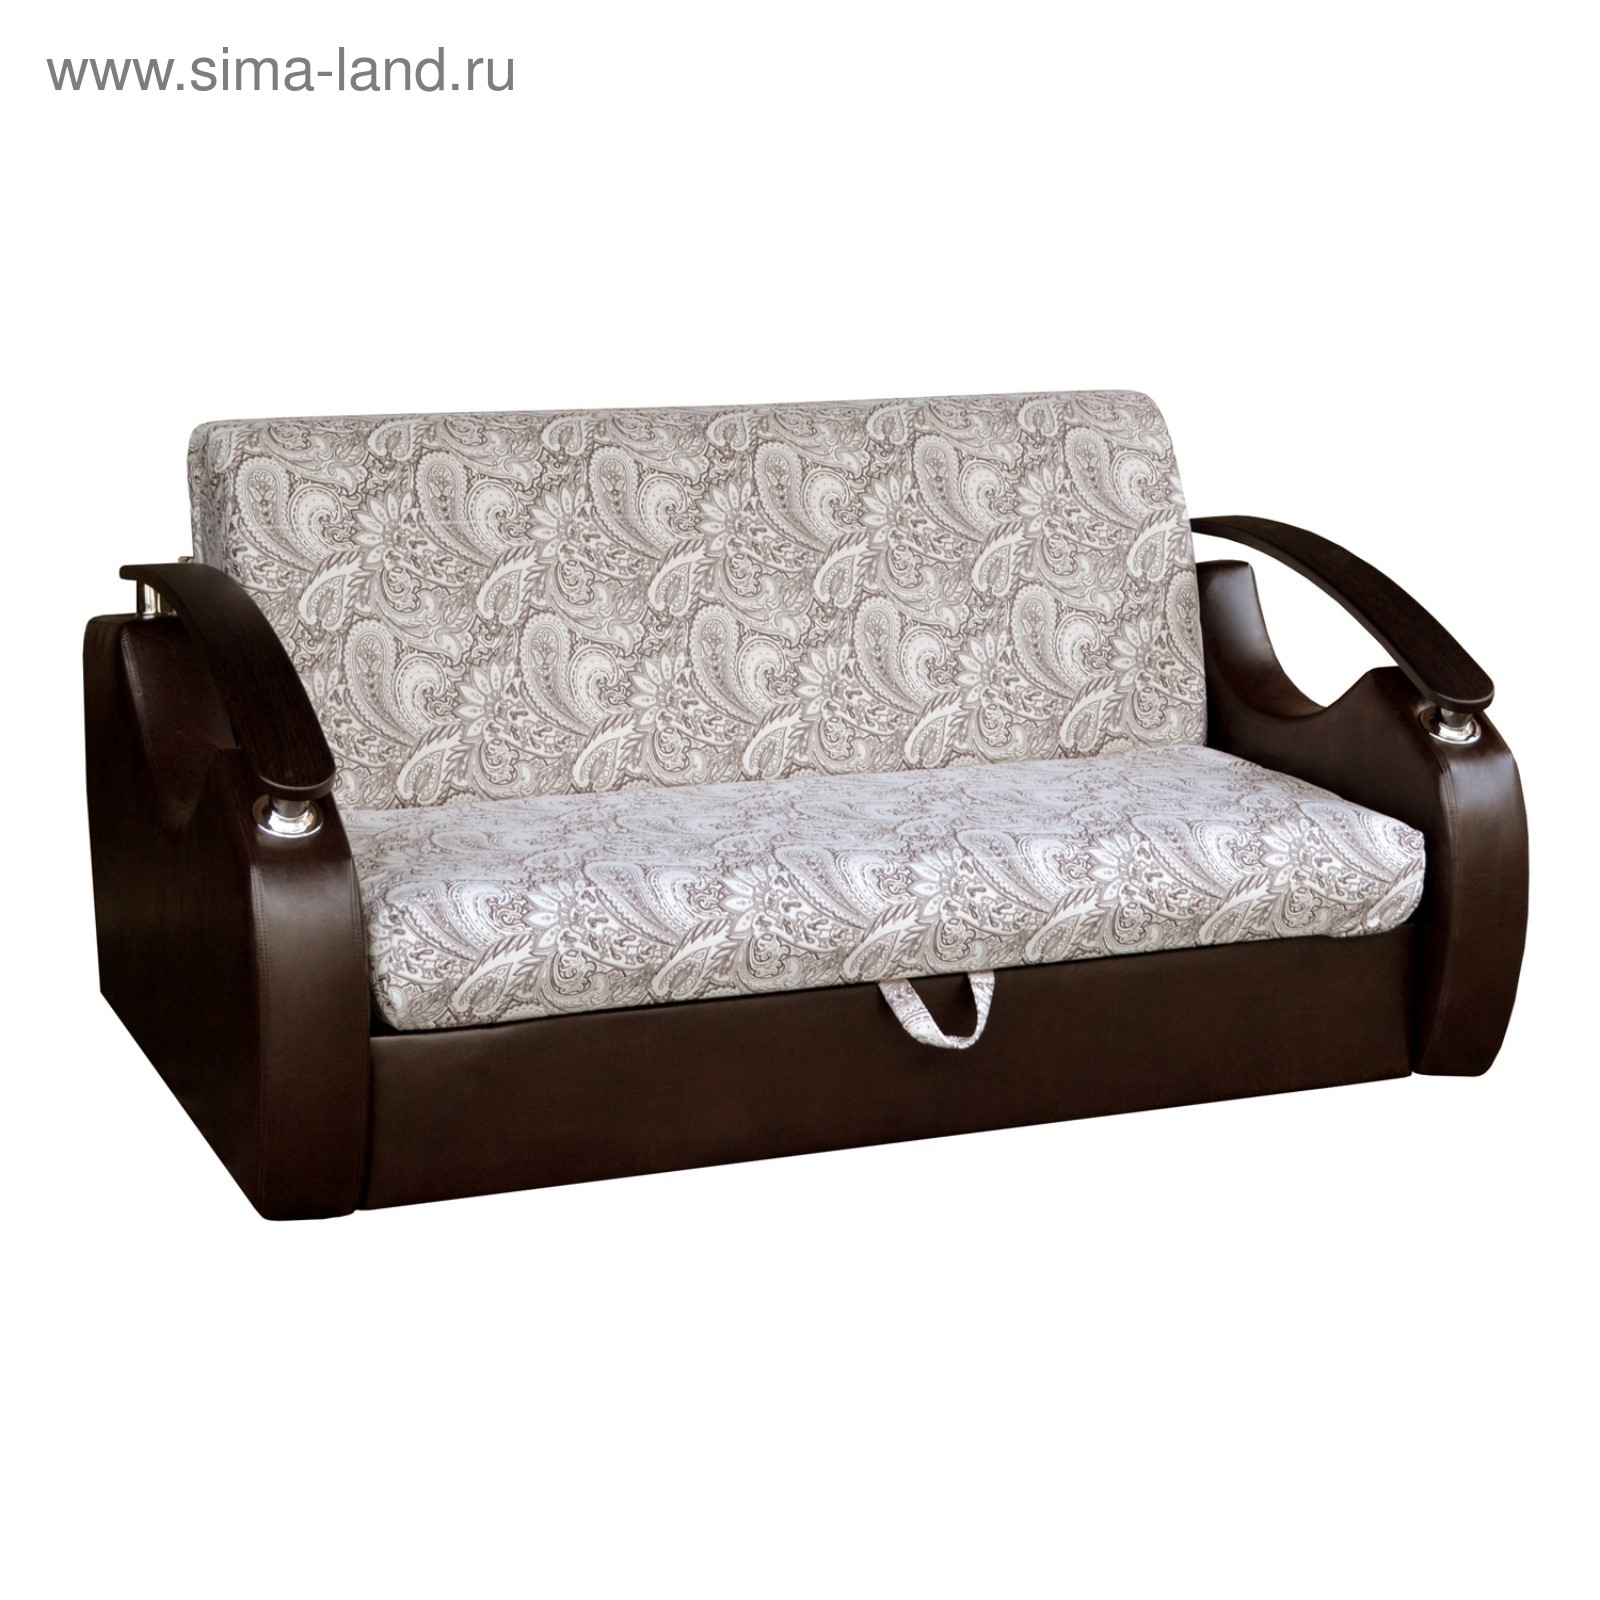 Sofa Bed Nepal Suite Mechanism Accordion Fabric Flovers 21 1503520 Sima Land